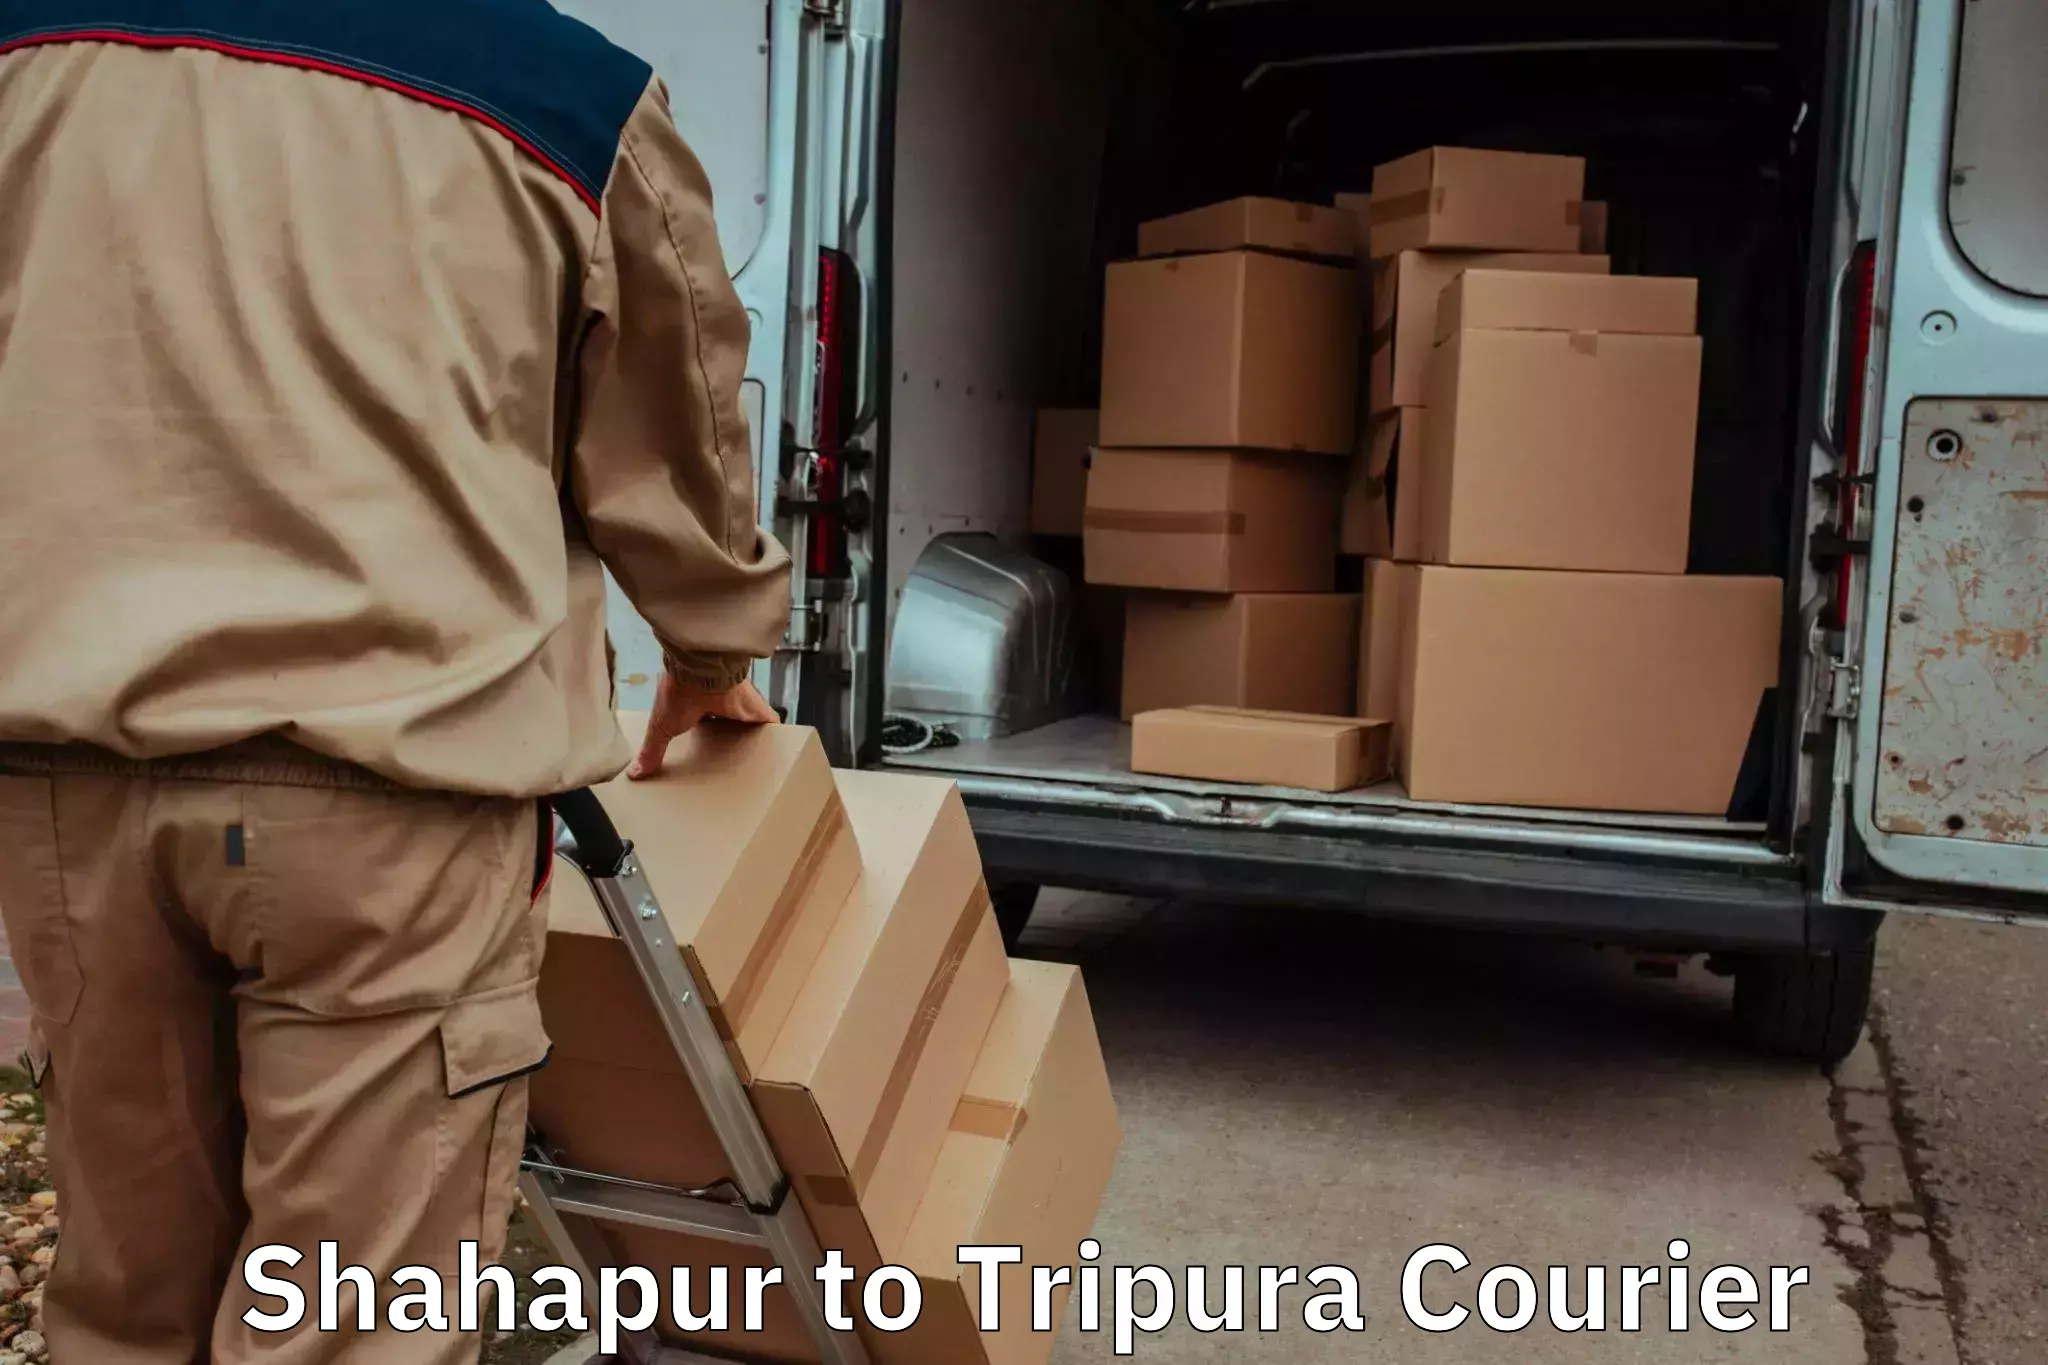 Household goods transport service in Shahapur to Udaipur Tripura